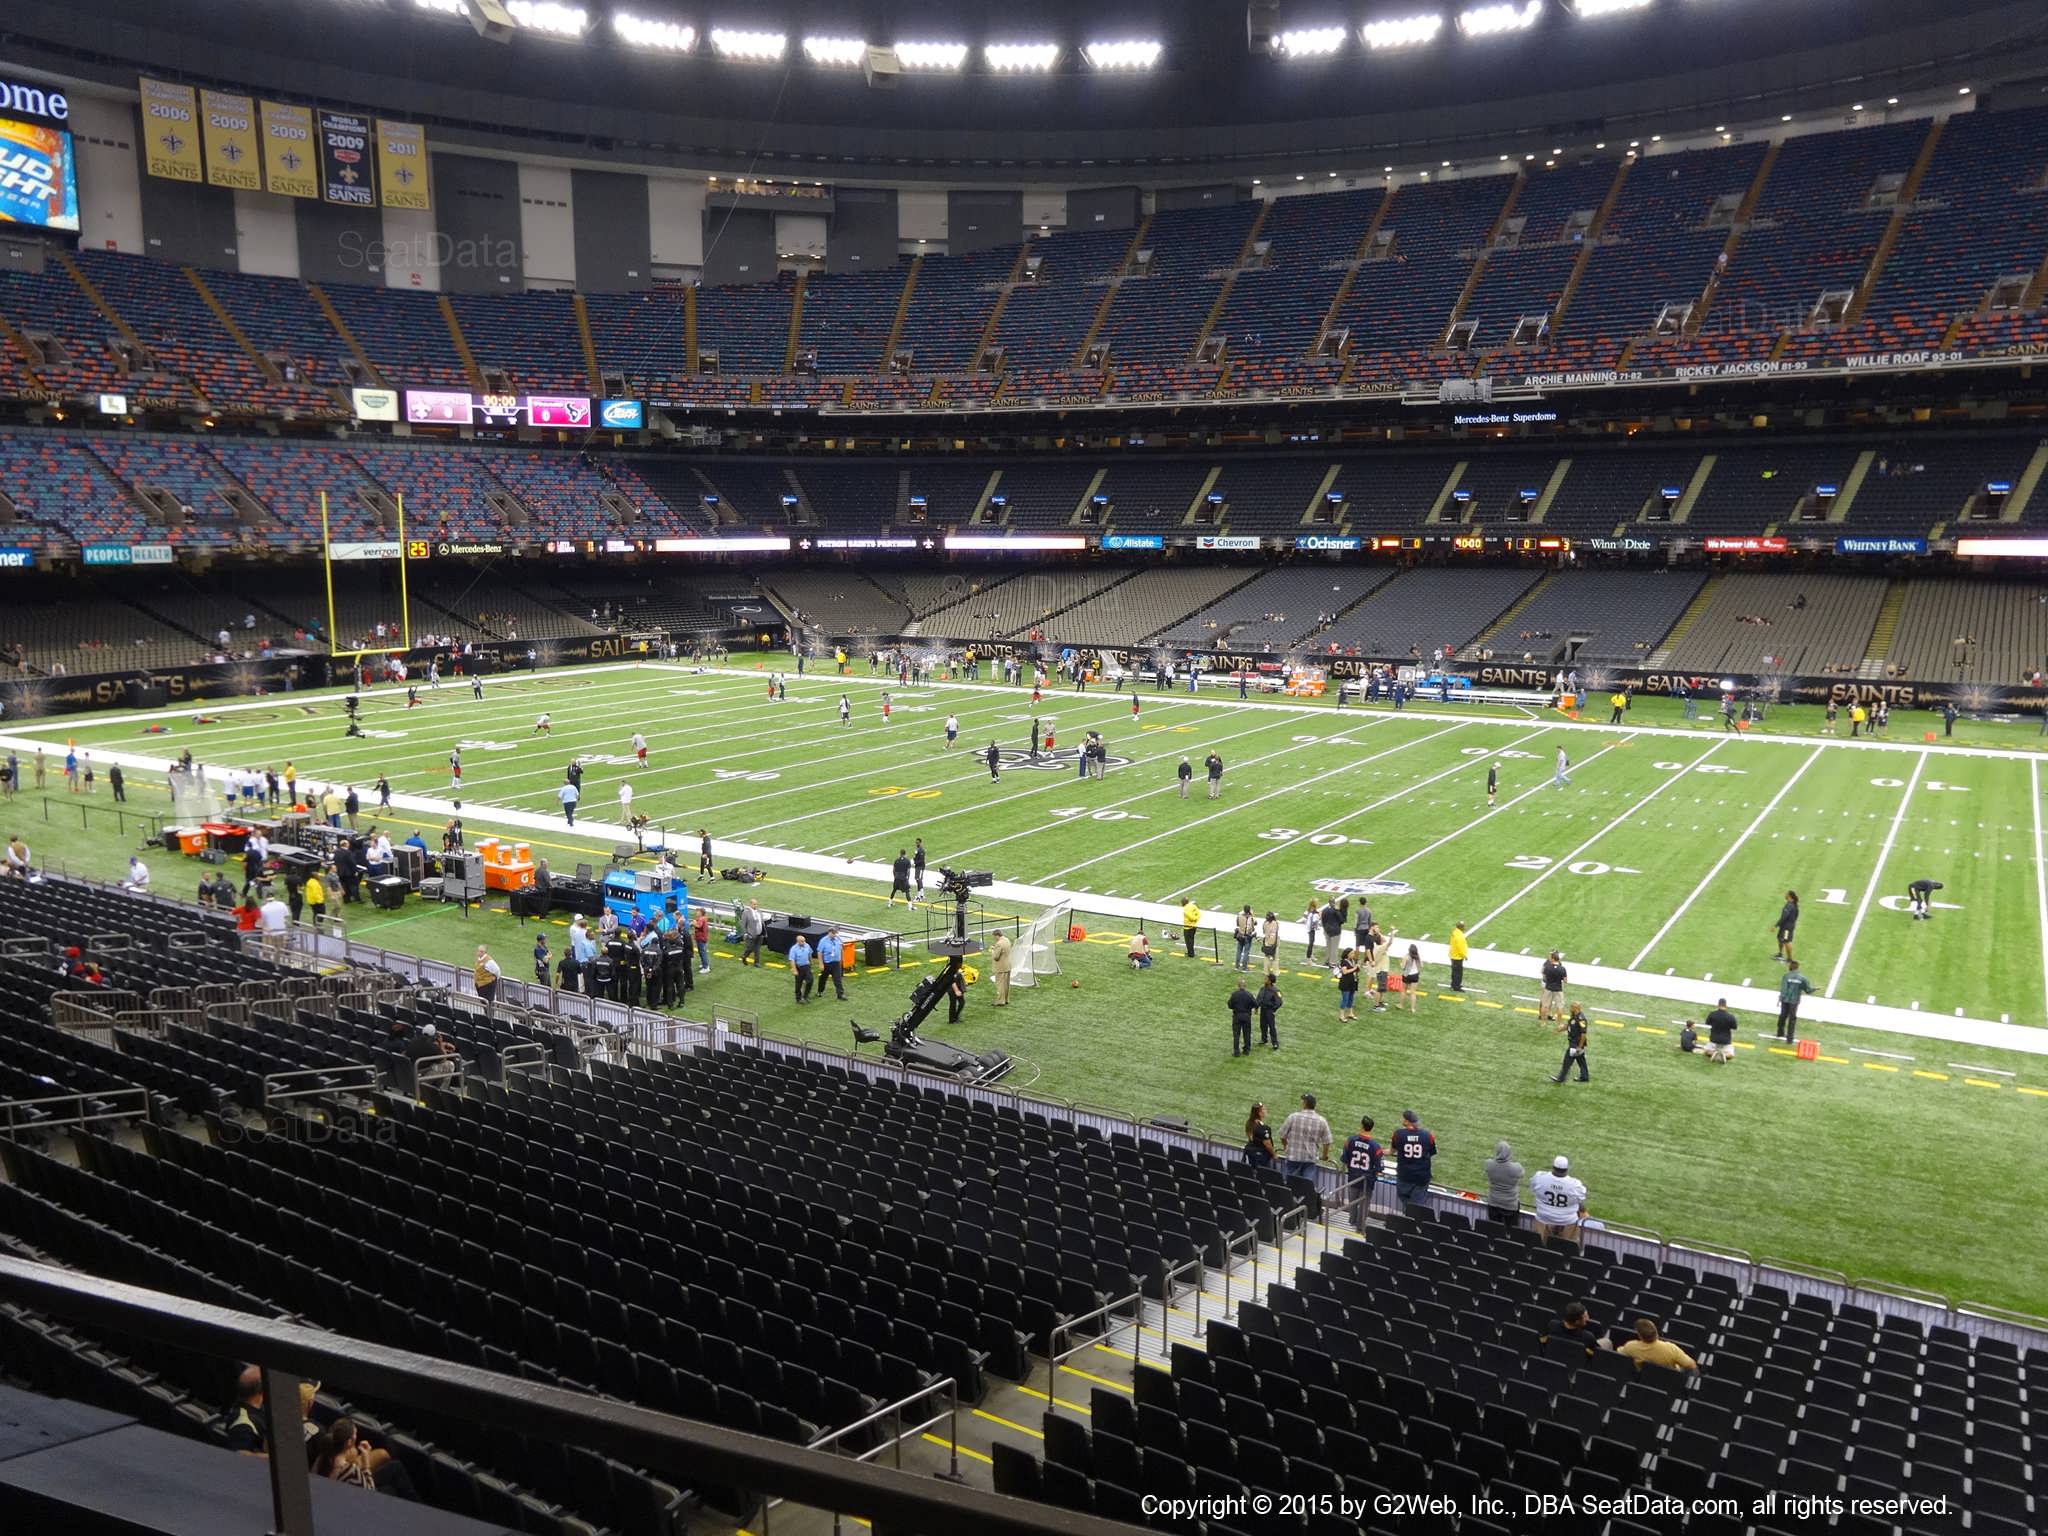 Seat view from section 257 at the Mercedes-Benz Superdome, home of the New Orleans Saints